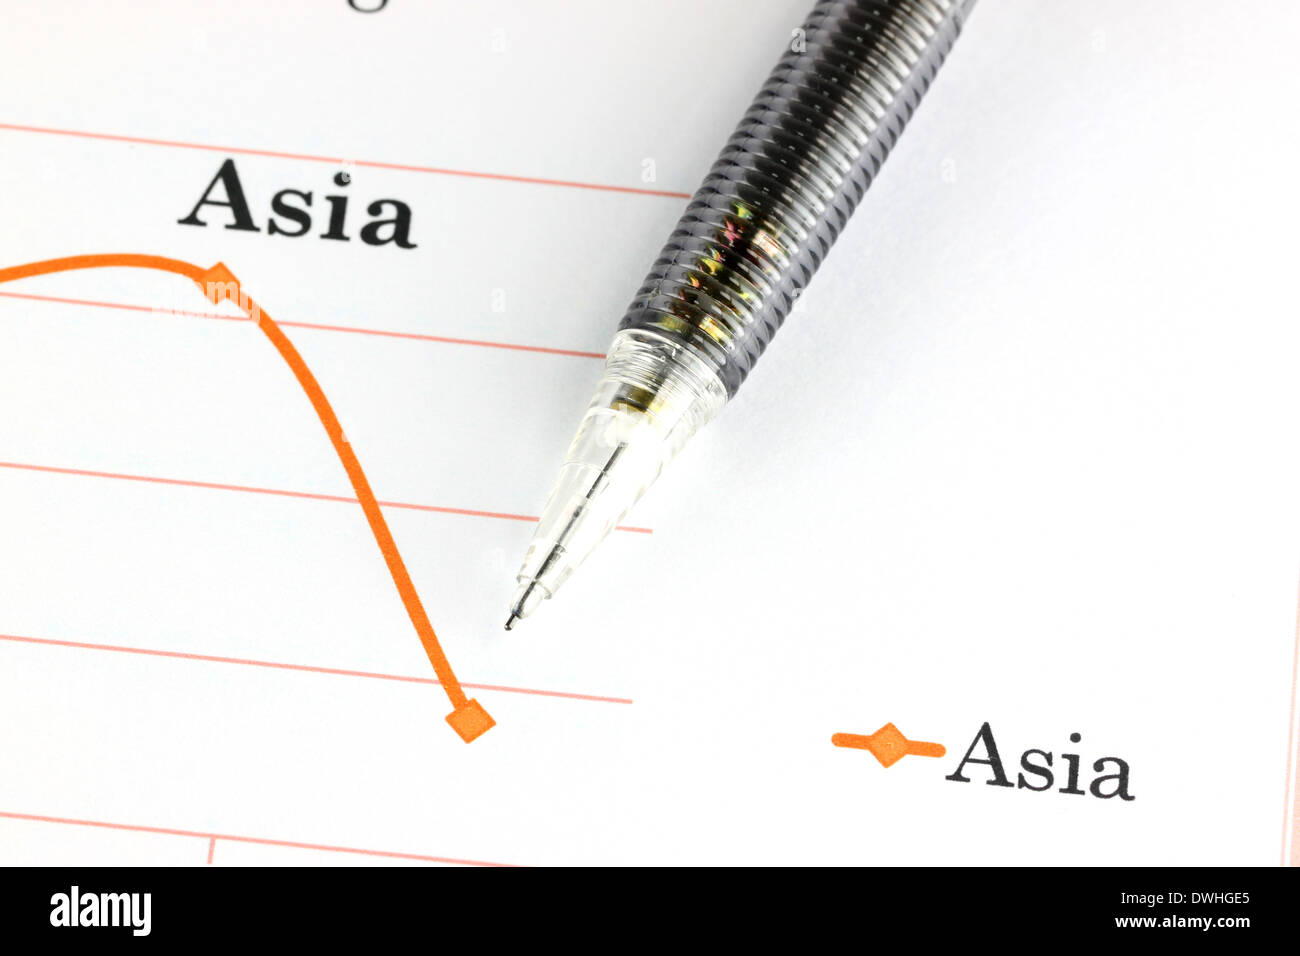 Focus Mechanical pencil point to dot on Asia graph. Stock Photo